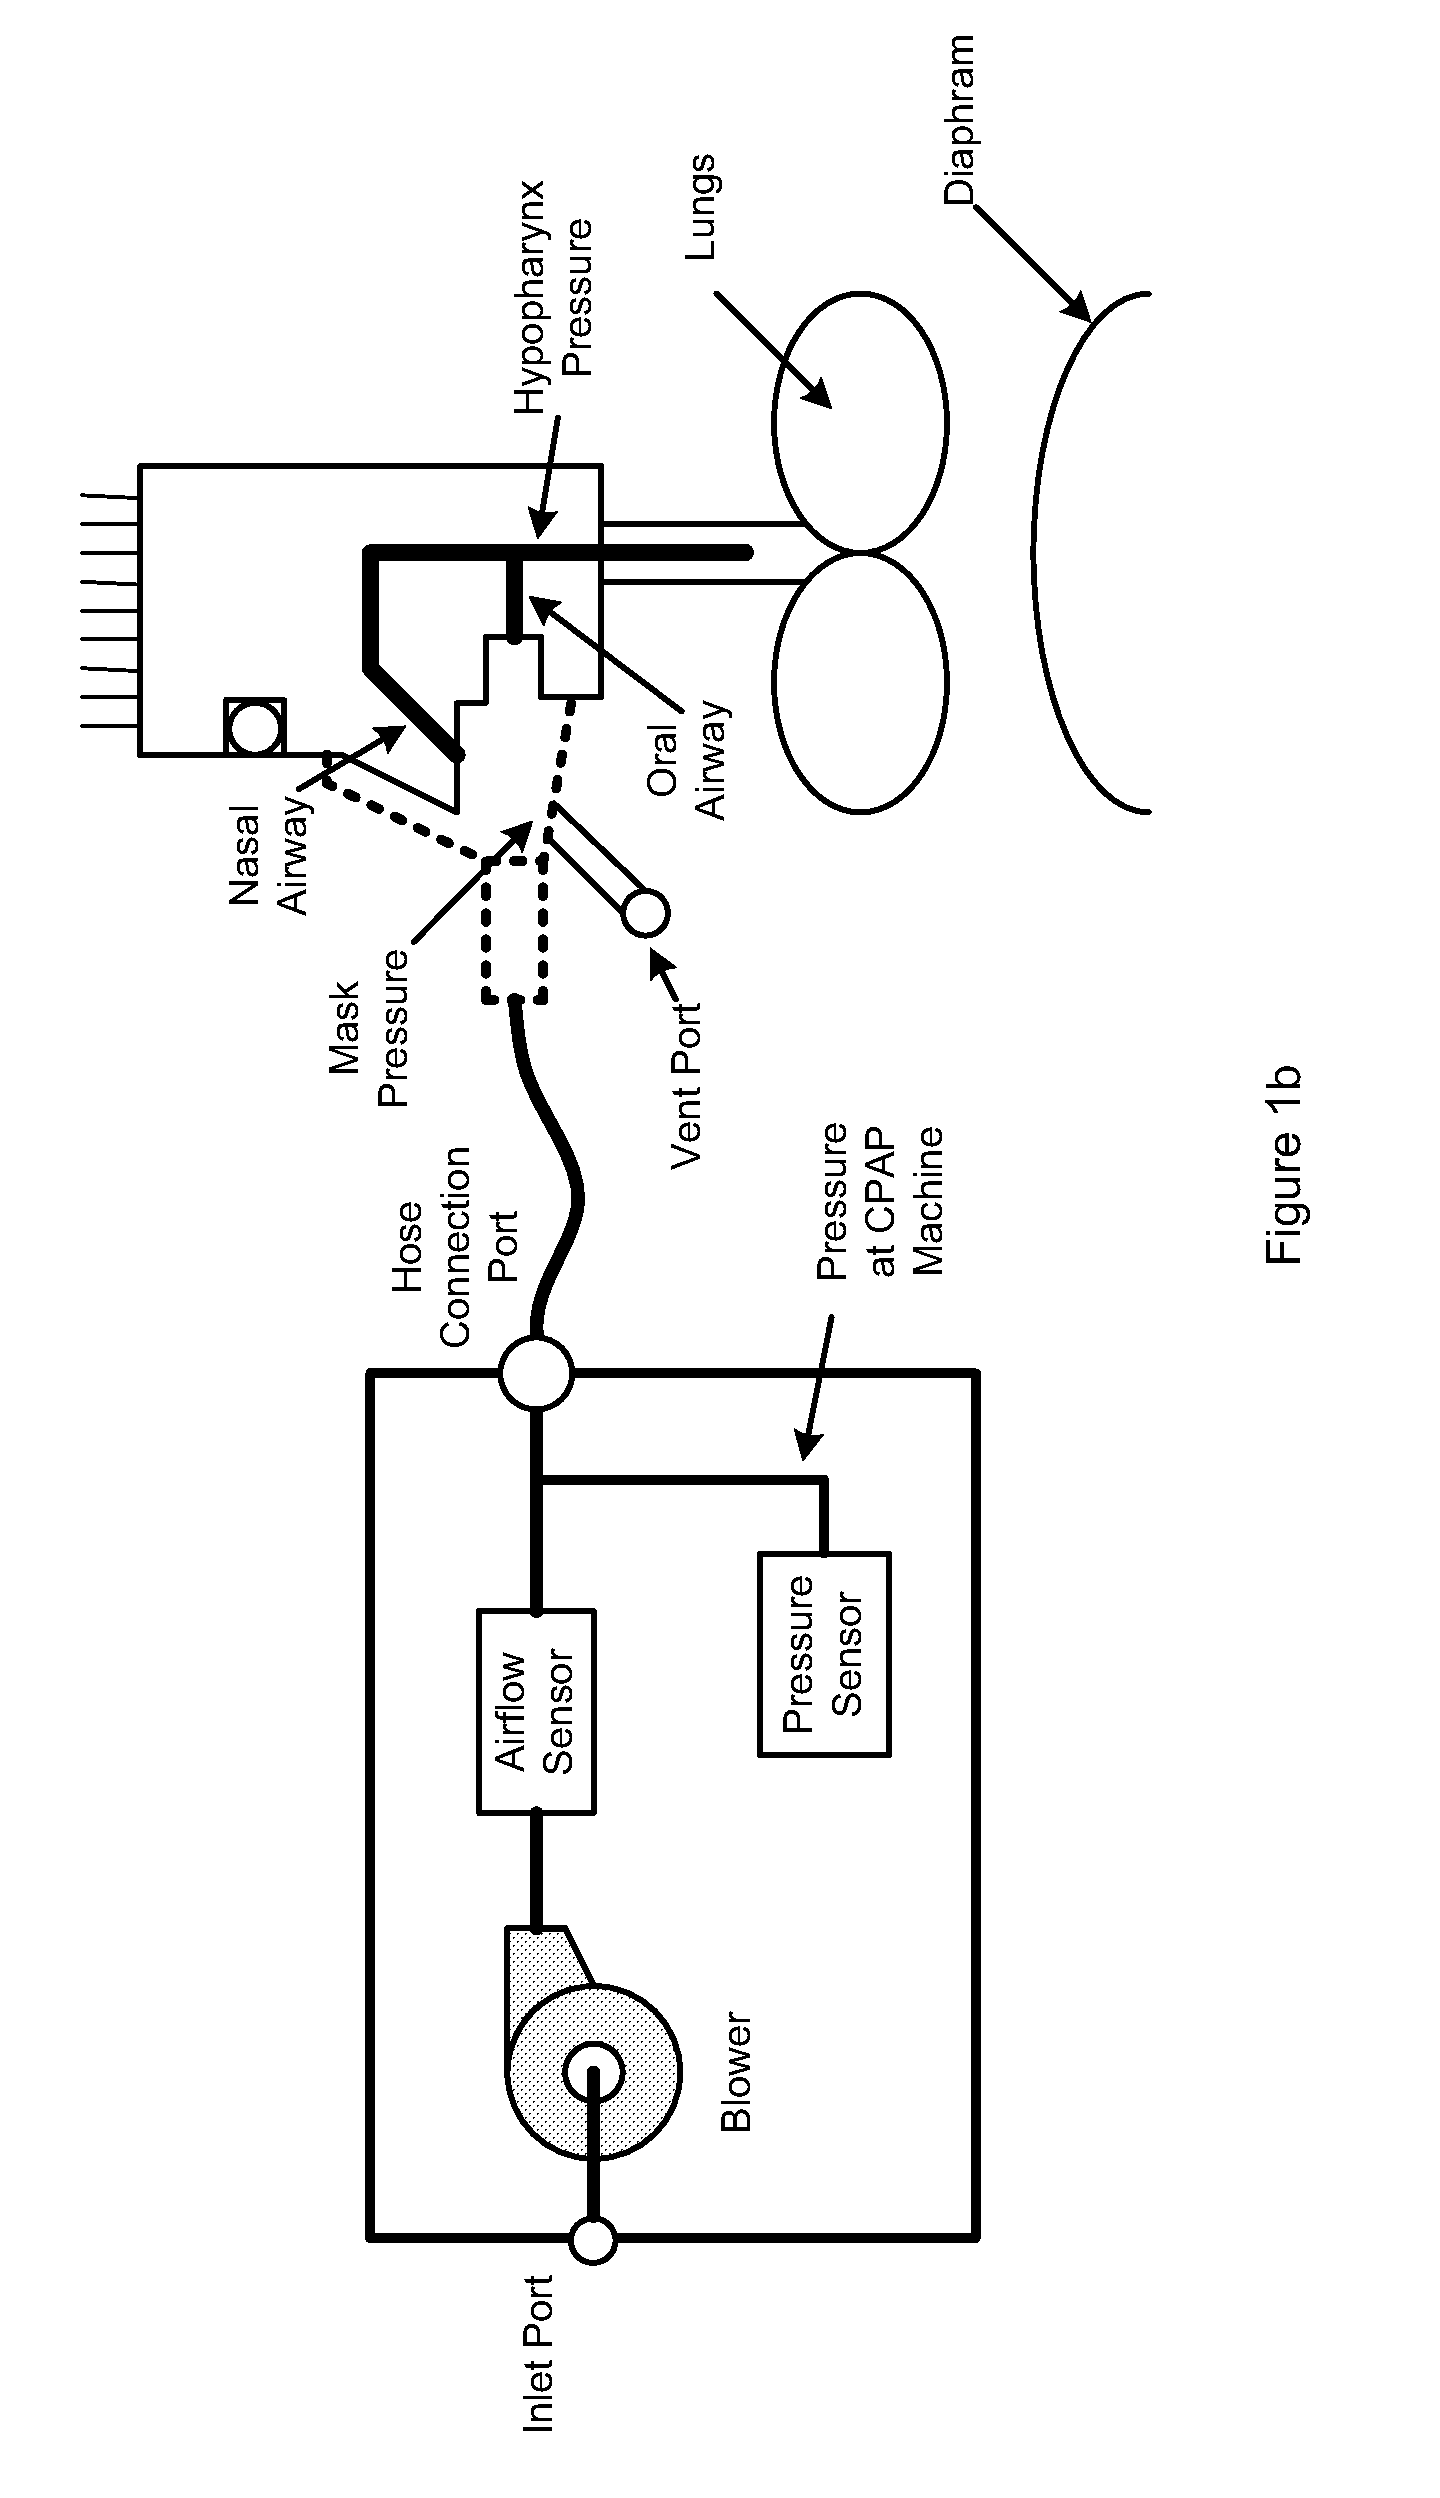 Positive Airway Pressure System and Method